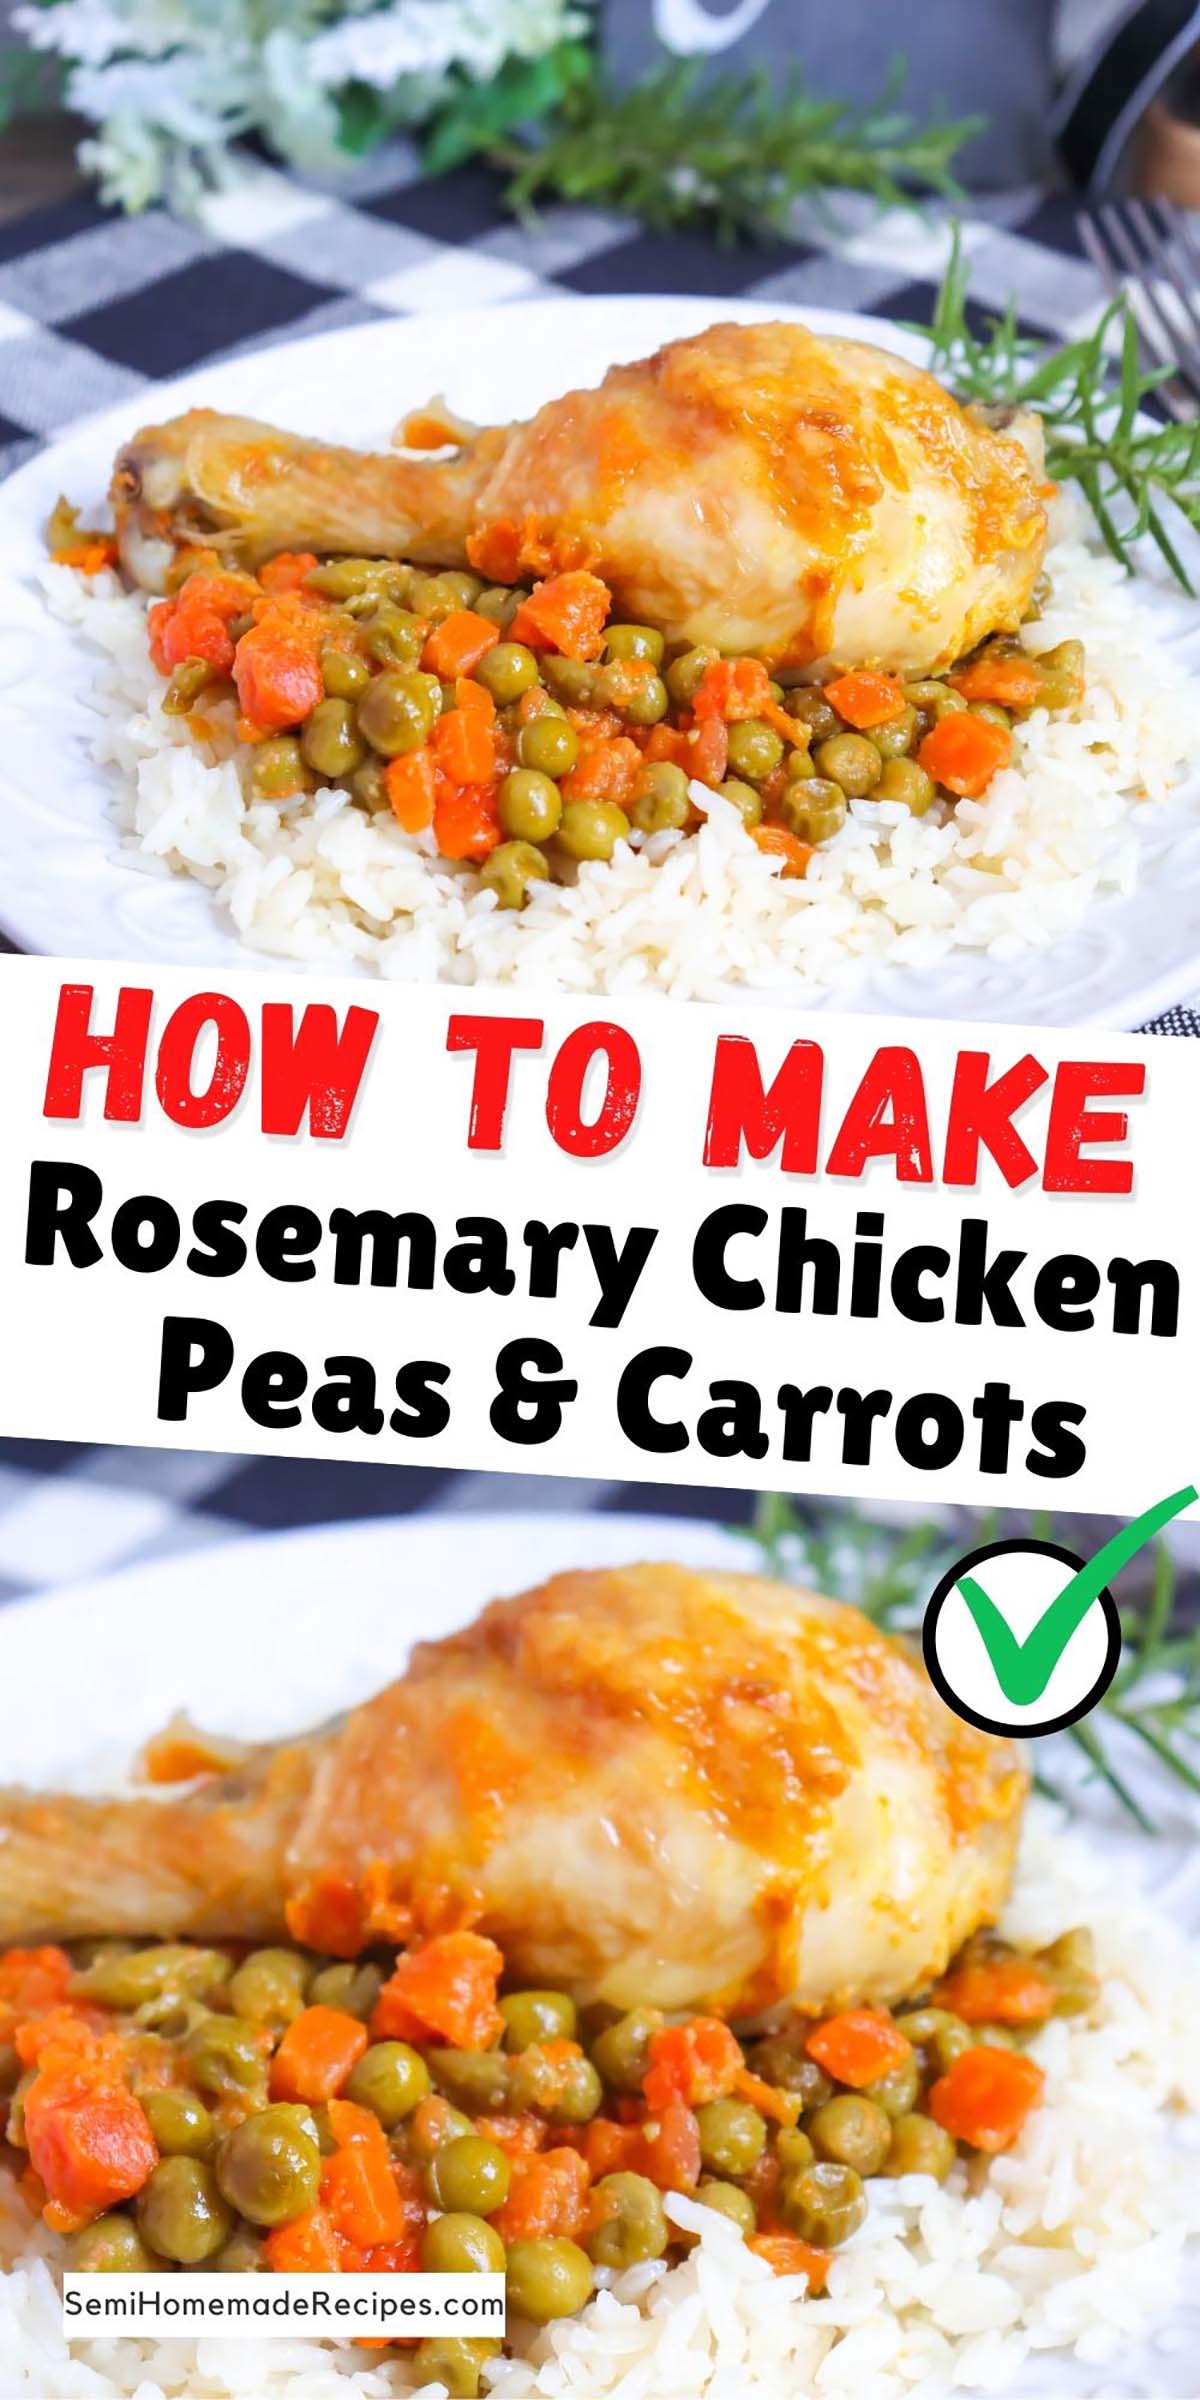 Rosemary Chicken with Peas and Carrots - Oven Baked Chicken nestled together with peas, carrots, fresh rosemary and garlic! Get Ready for a super easy chicken dinner recipe that is going to cook all together in one pan!